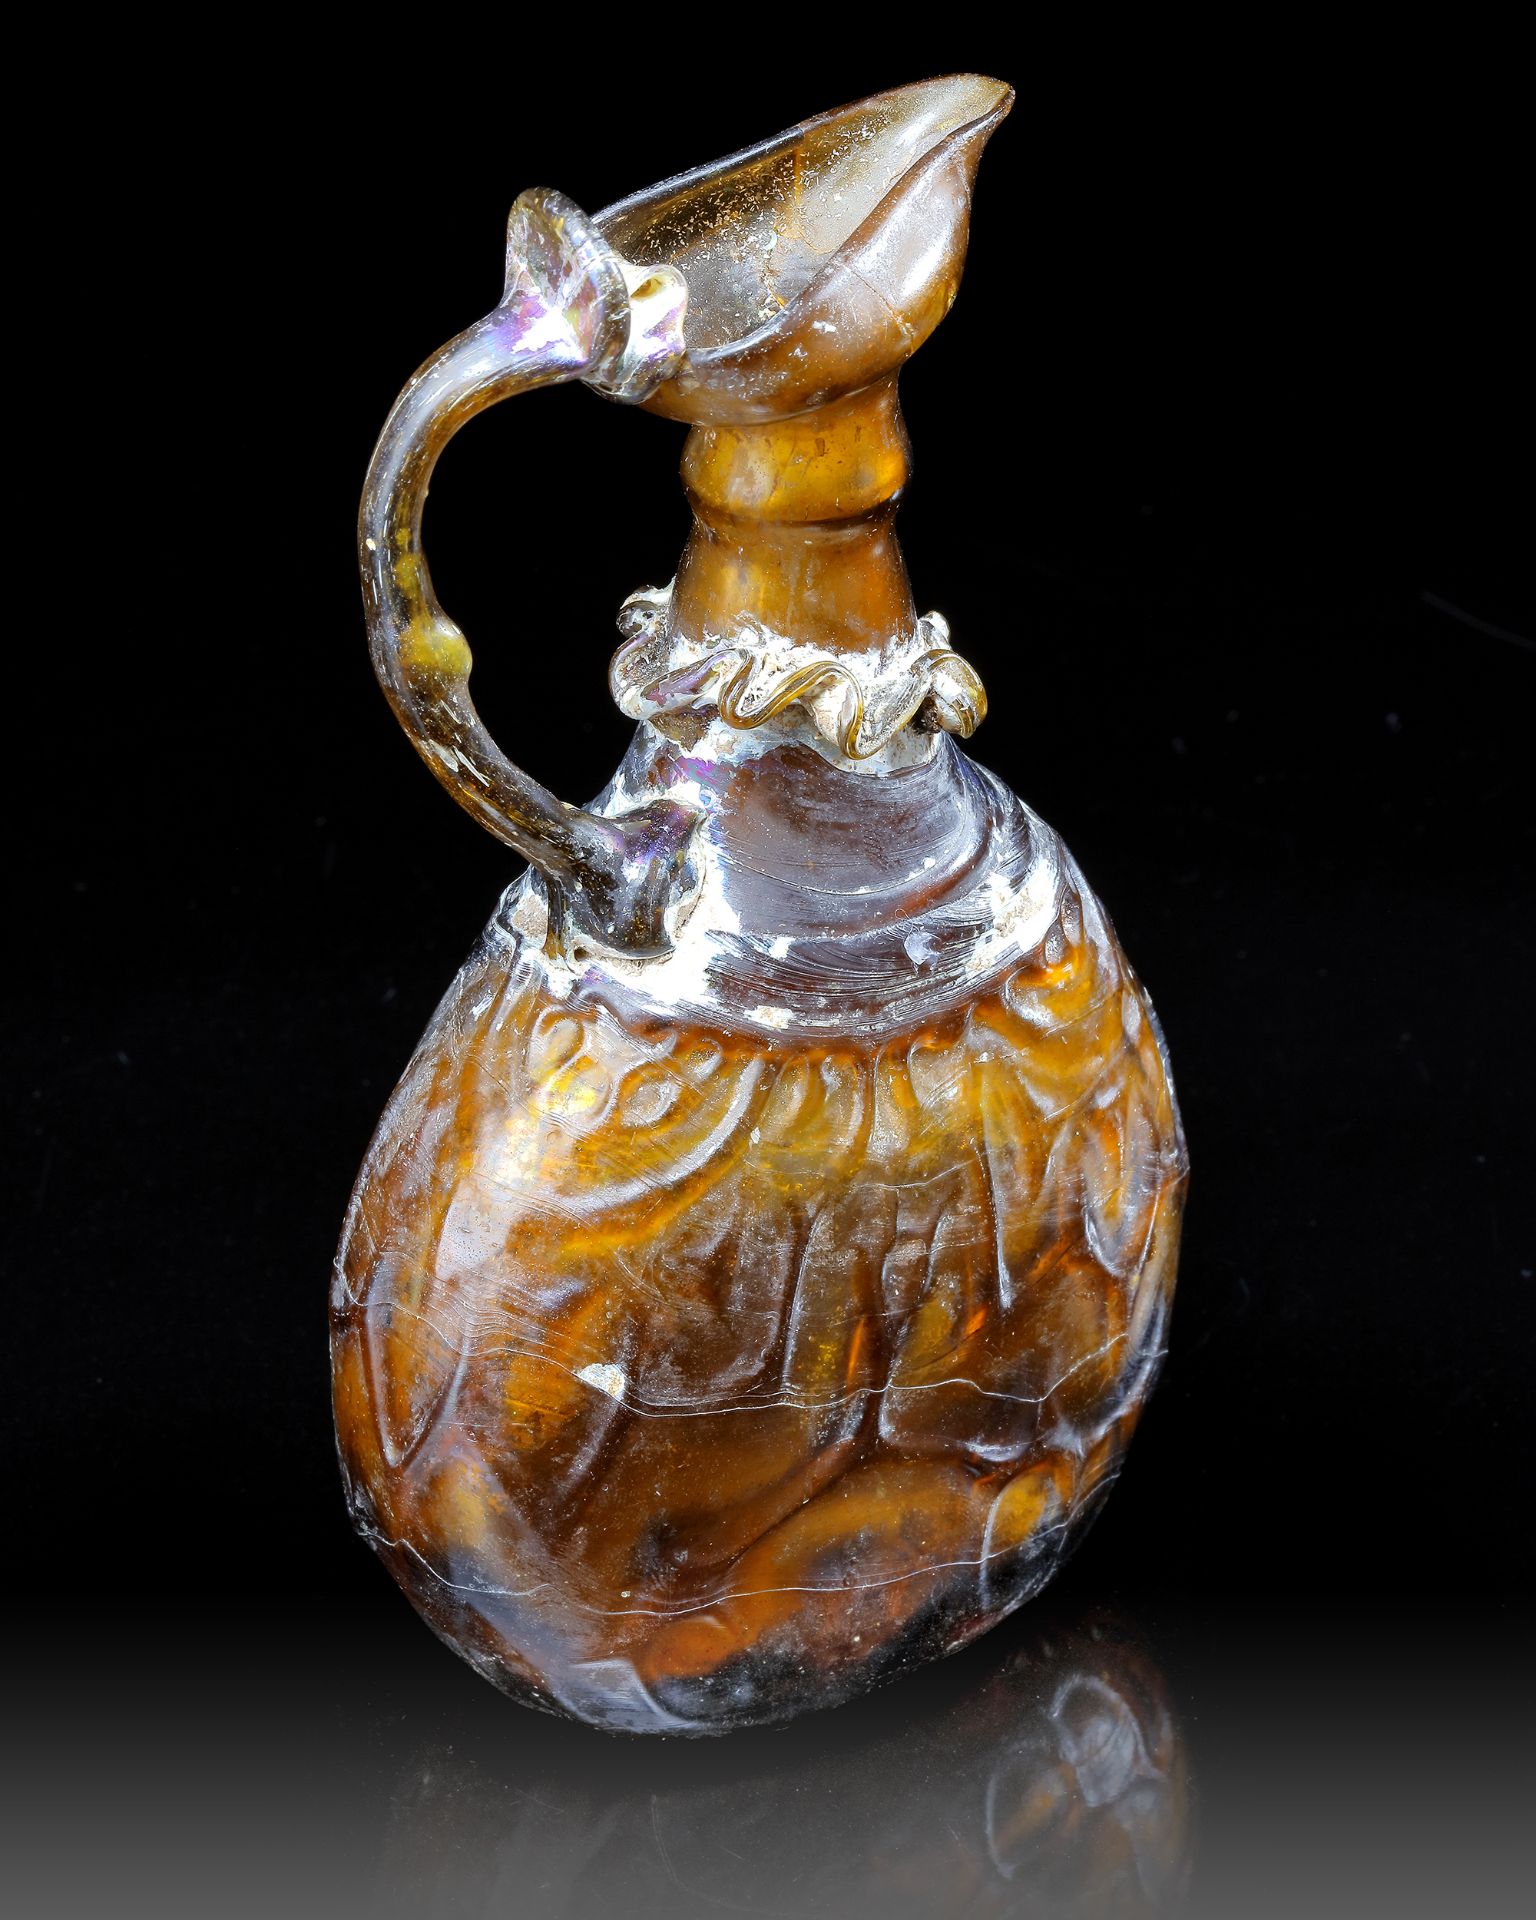 AN AMBER GLASS JUG, PERSIA, 10TH-11TH CENTURY - Image 5 of 5